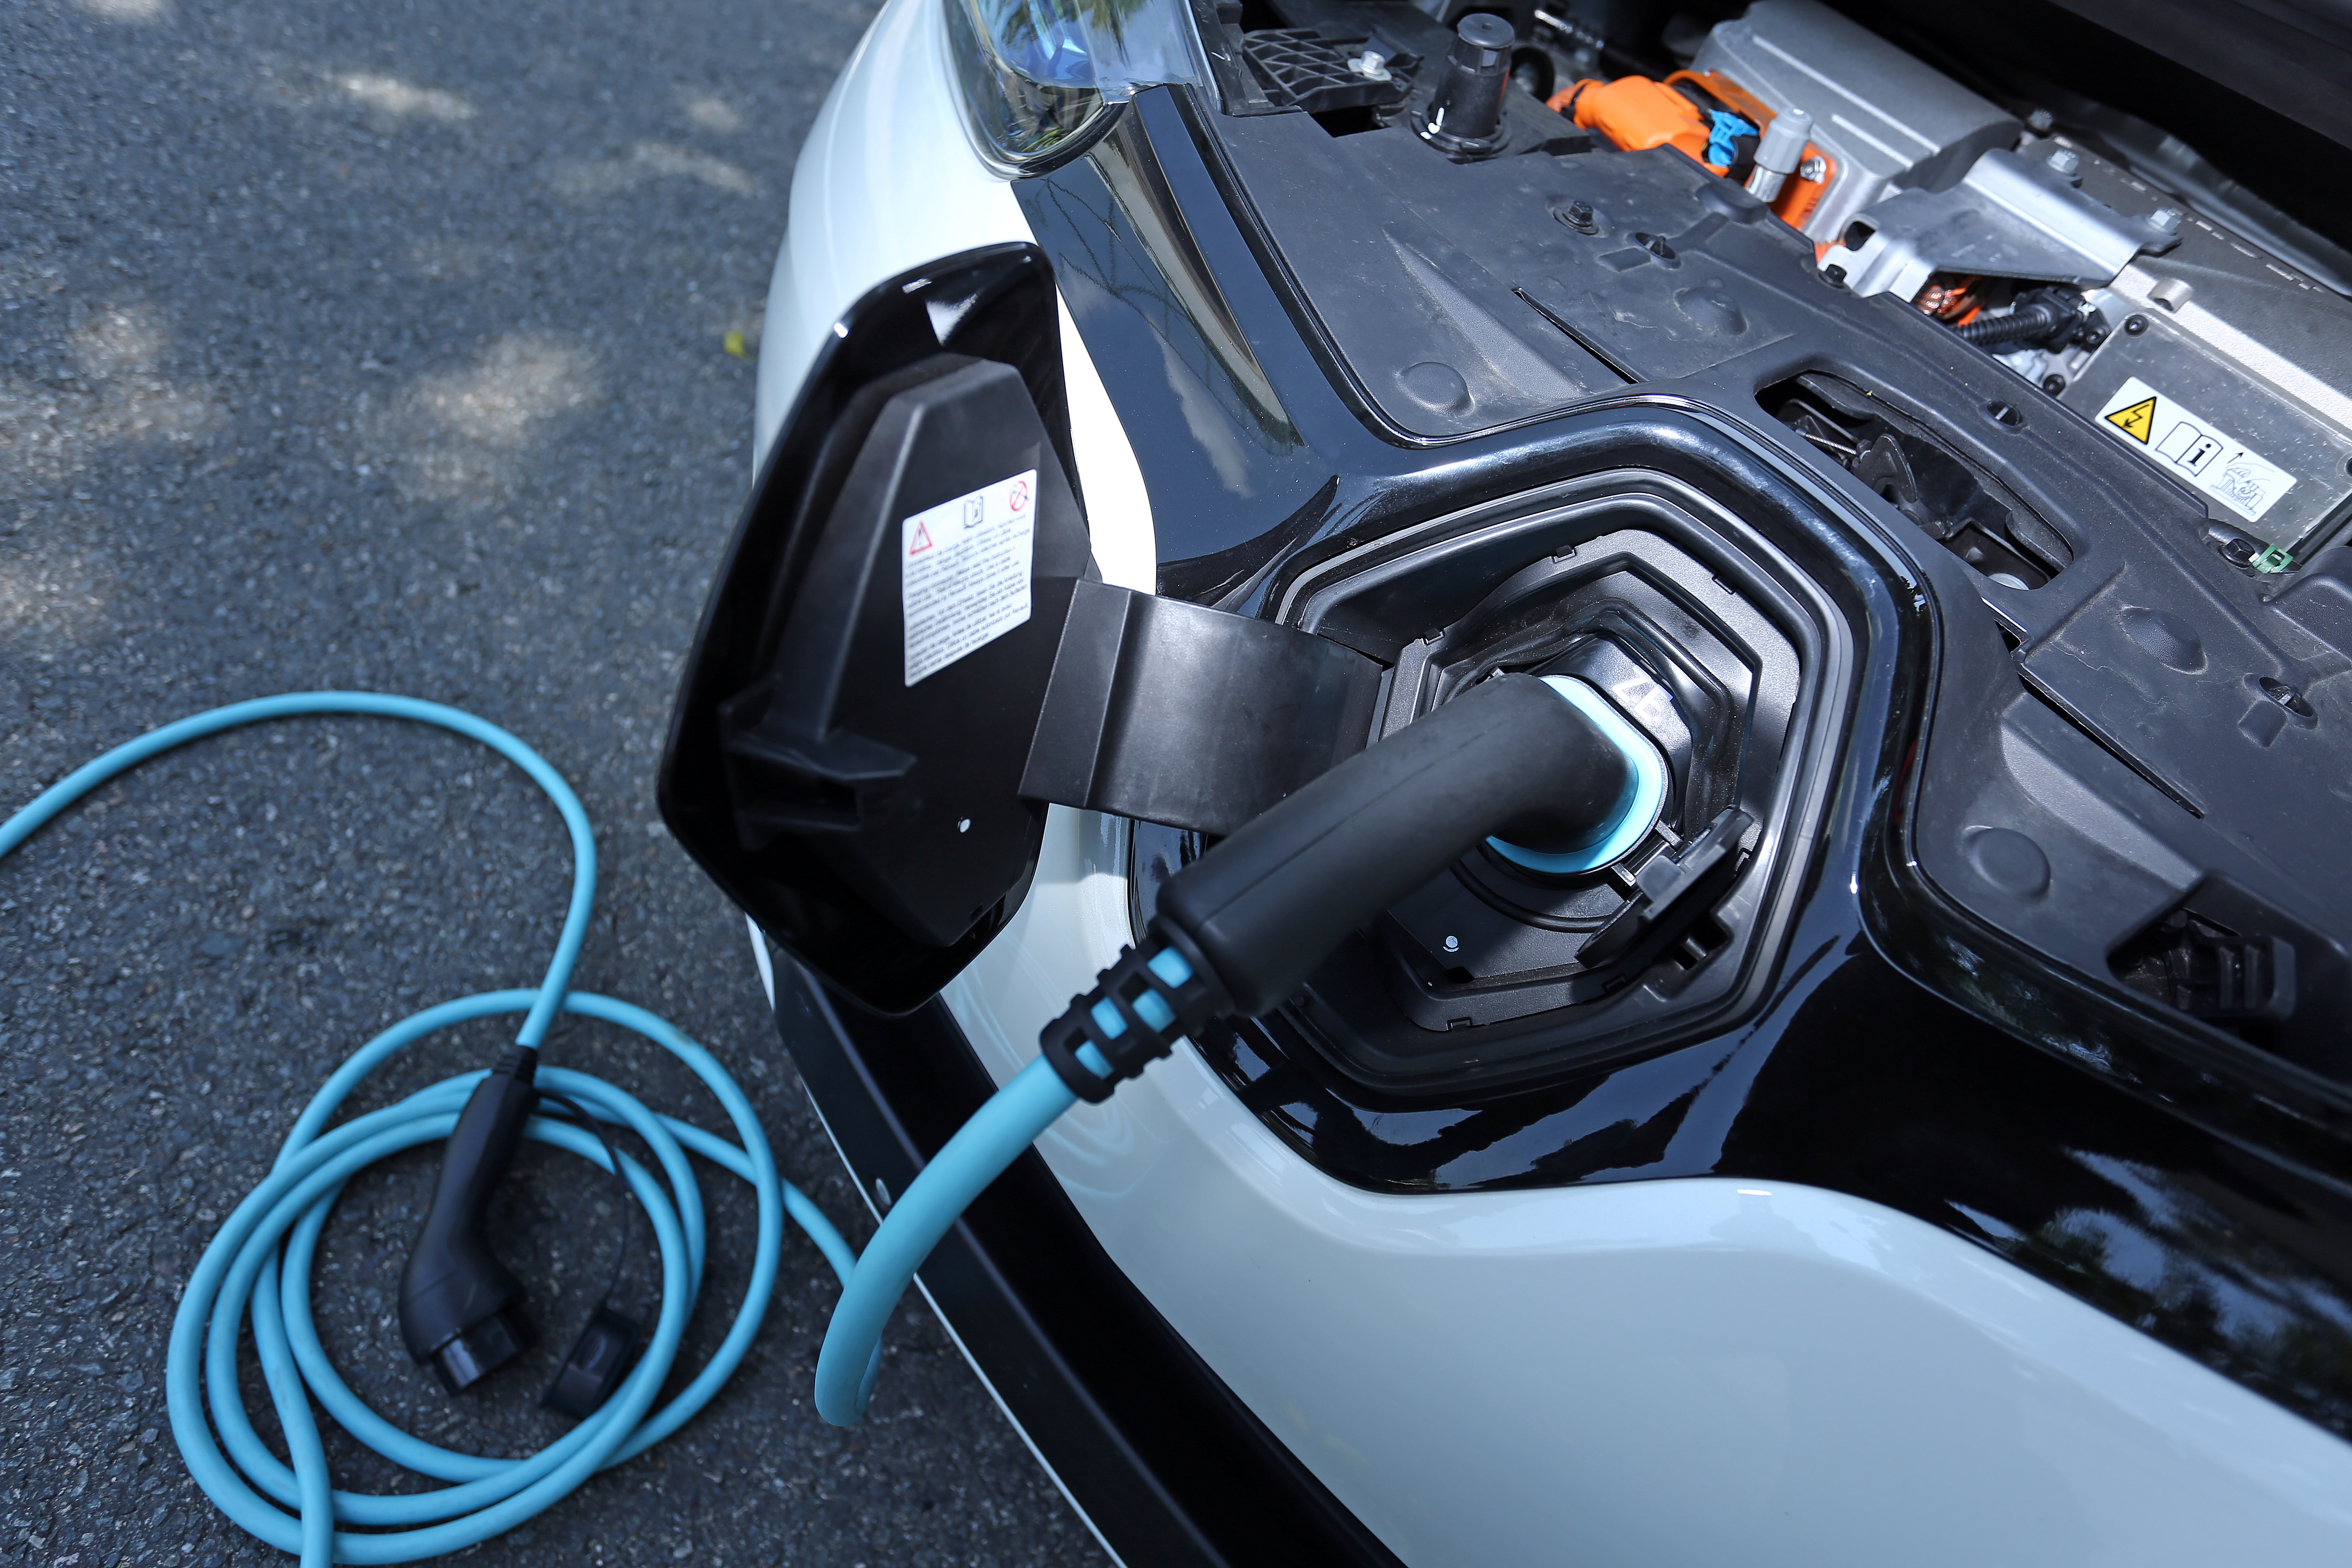 More major global automakers like Renault (pictured) are jumping into the EV market, but the paucity of charging stations remains a stumbling block. Photo: Jonathan Wong